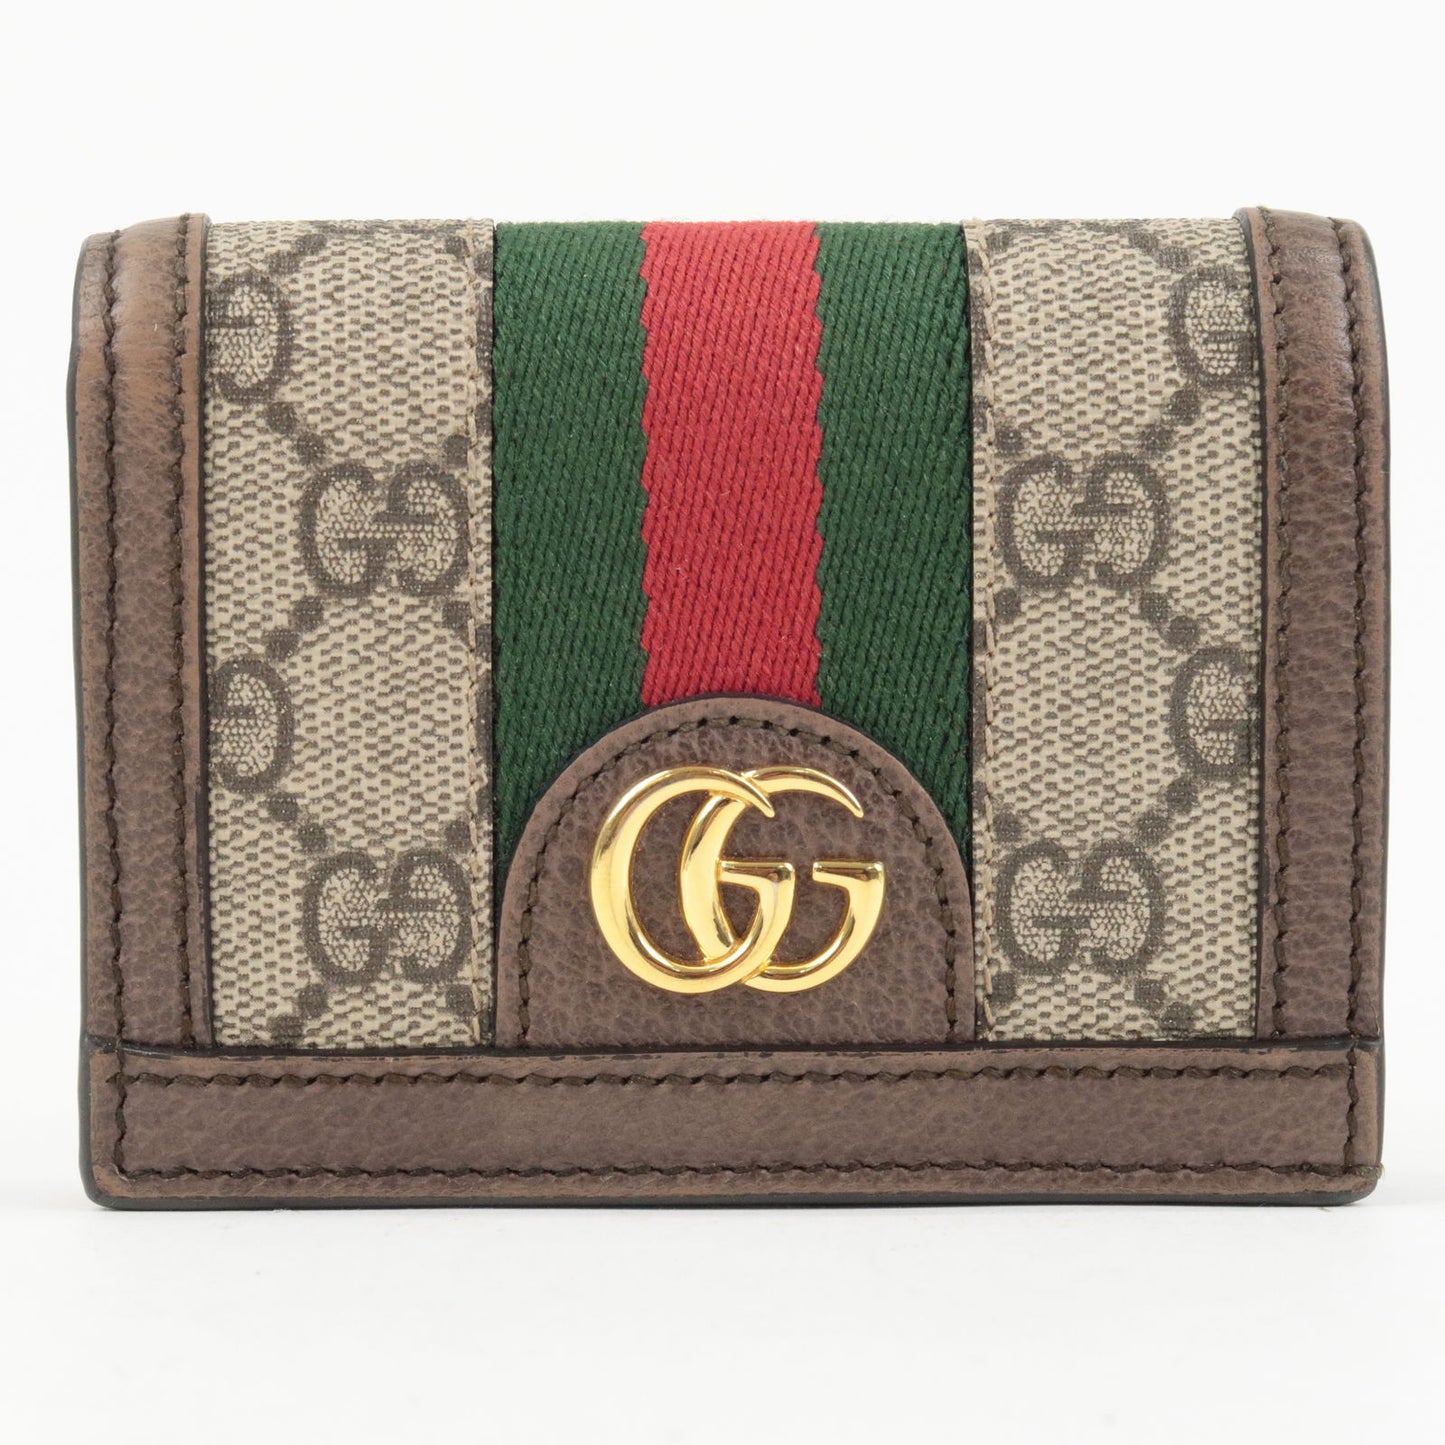 GUCCI Sherry Ophidia GG Supreme Leather Folded Wallet 523155